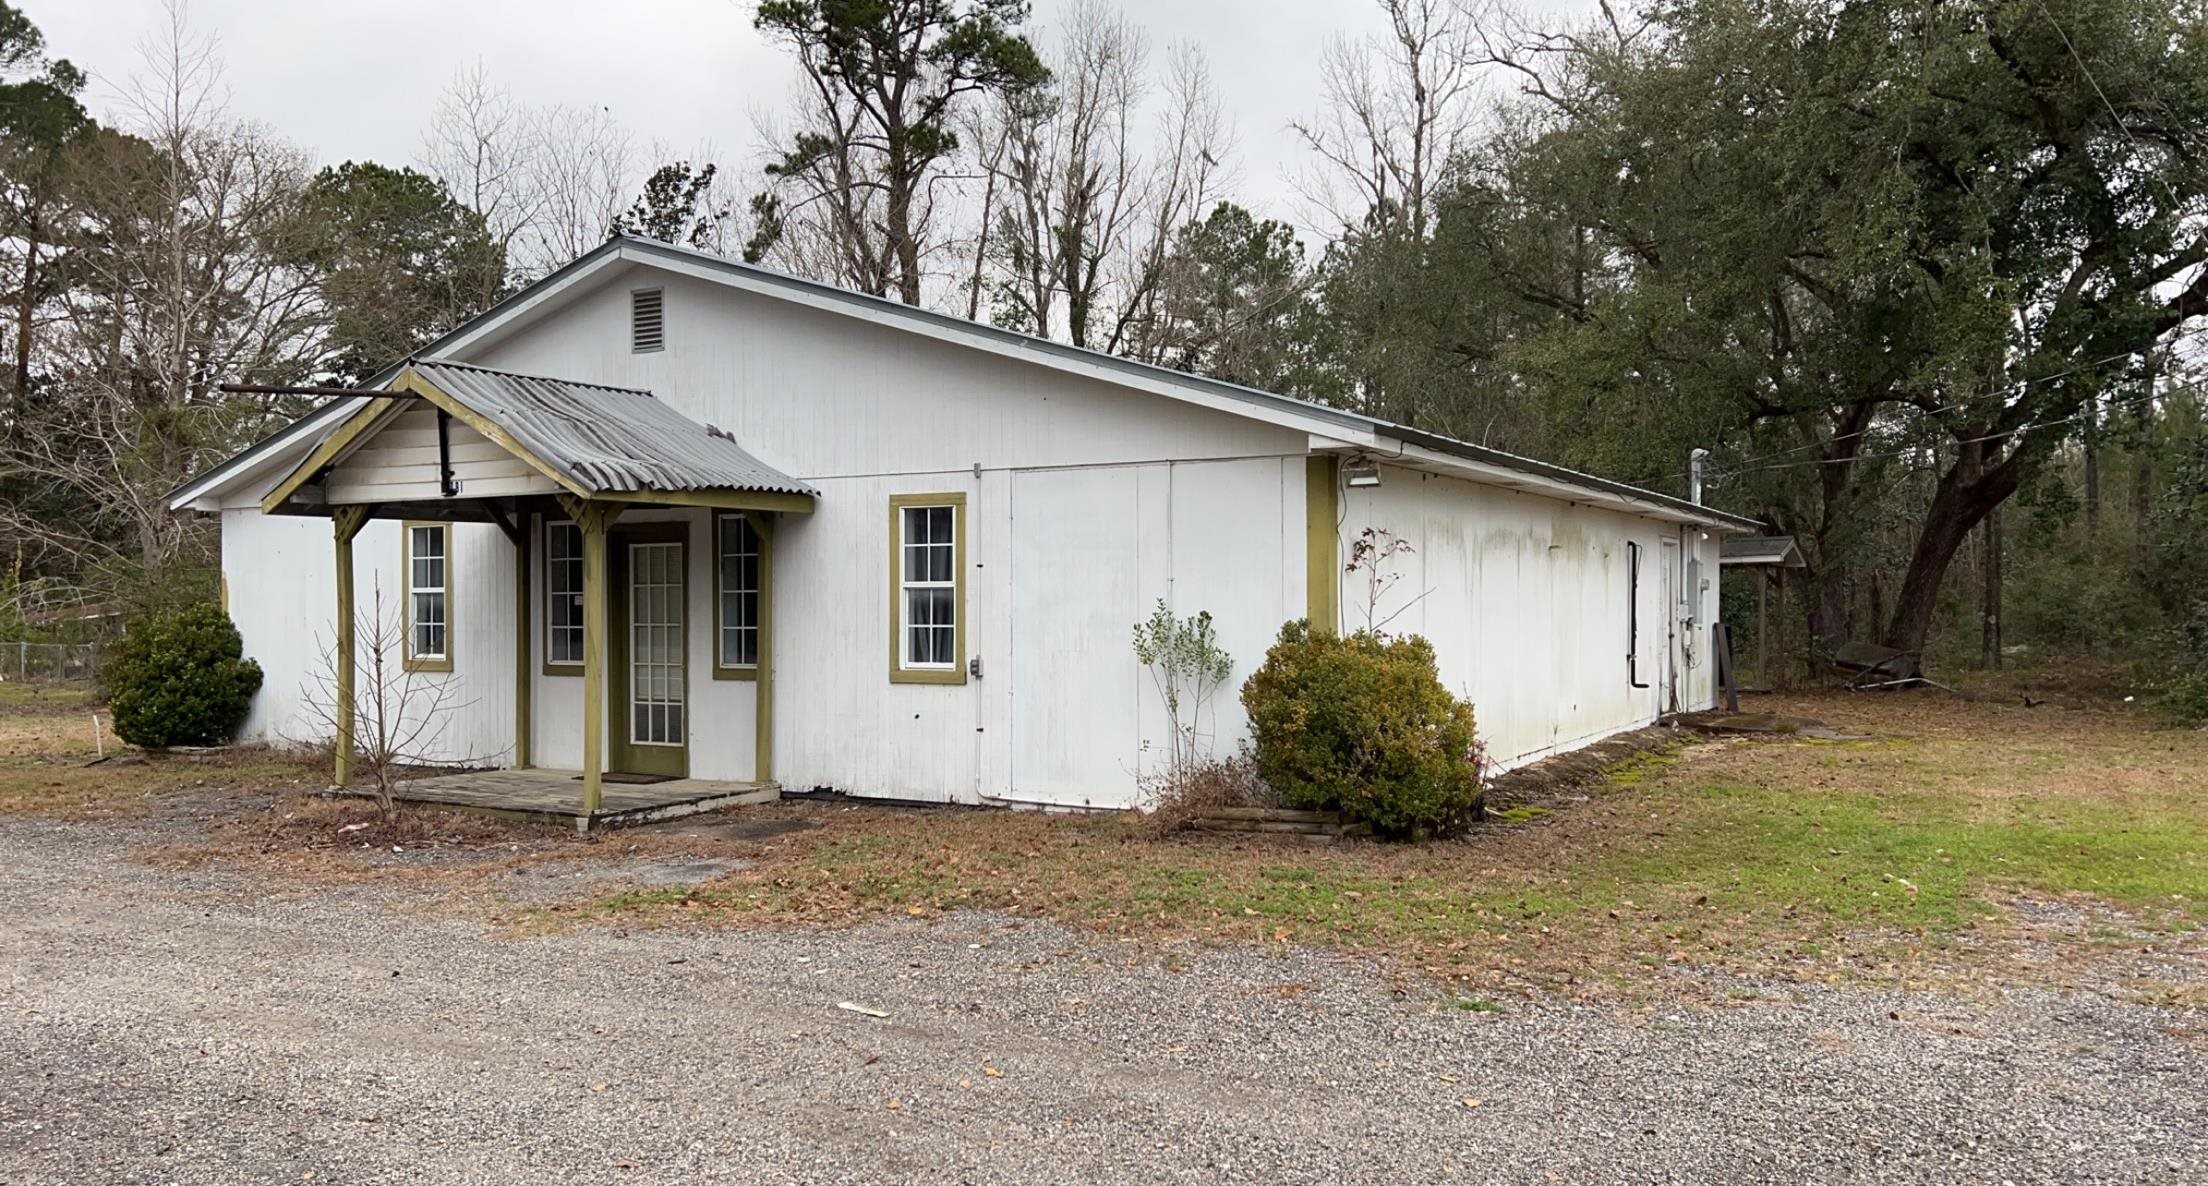 1.49 ACRES OF COMMERCIAL PROPERTY WITH ESTABLISHED BUSINESS BUILDING AND SMALL BUILDING BEHIND IT FOR STORAGE.  BUILDING IS CONCRETE BLOCK WITH TOTAL AREA BEING 1854 SQUARE FEET.  114 FEET OF HIGHWAY FRONTAGE (HWY 65).